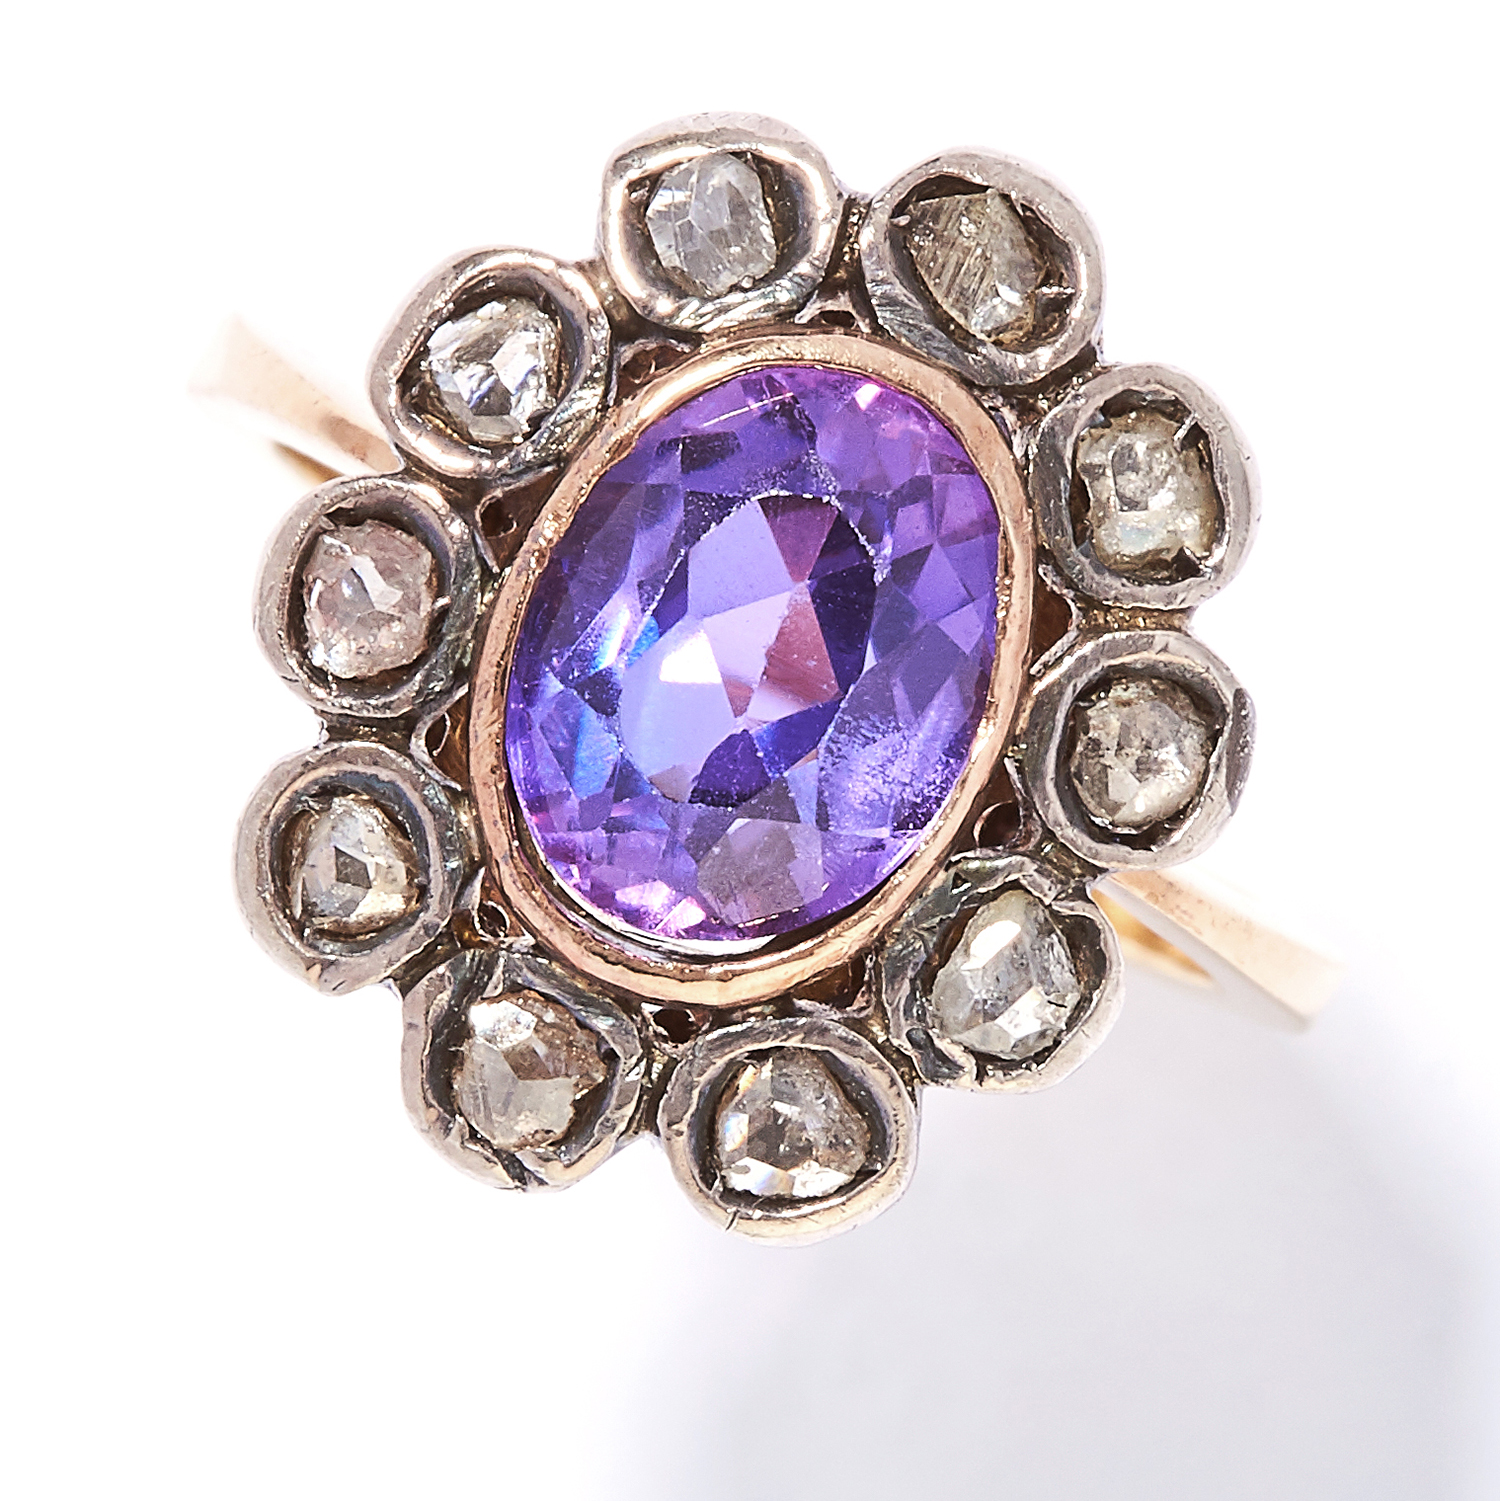 AMETHYST AND DIAMOND RING in yellow gold and silver, oval cut amethyst encircled by rose cut